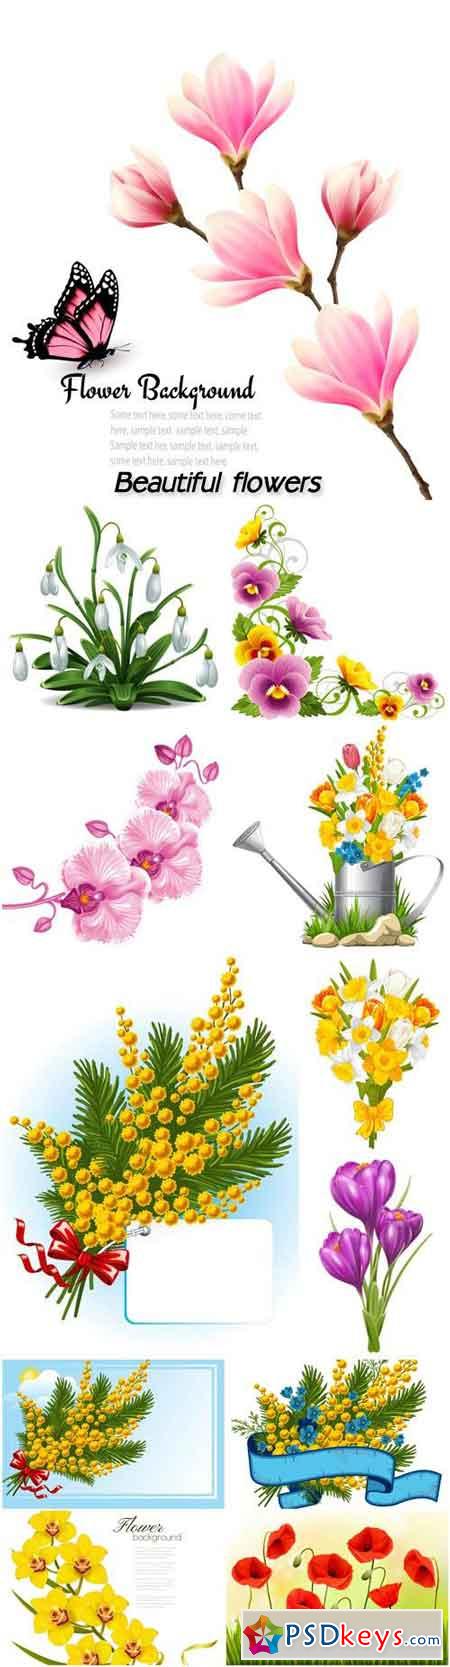 Beautiful flowers, orchids, crocuses, snowdrops, mimosa